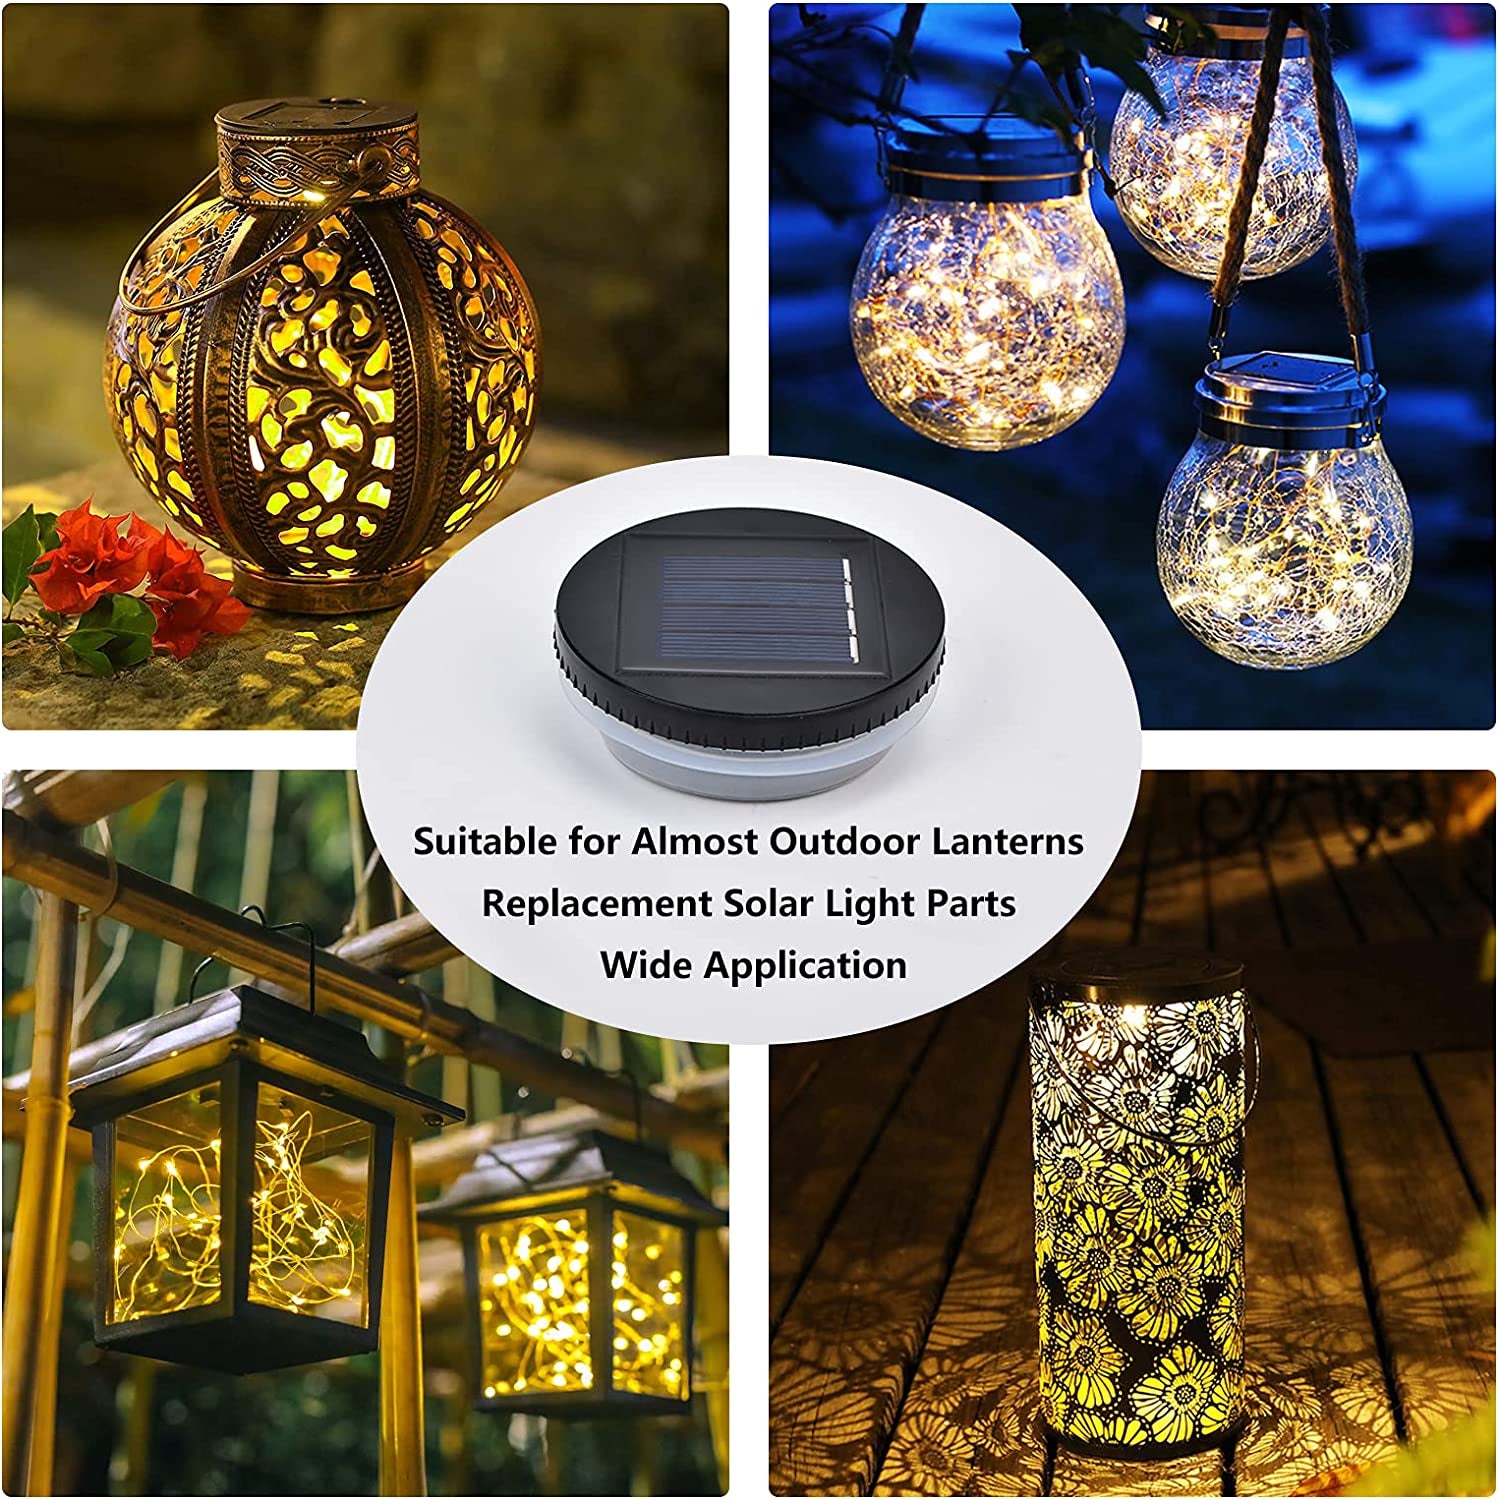 6 Packs Solar Lights Replacement Top, 3.15 in Silicone Edge Solar Lids Lights Warm White LED Light Replacement Solar Light Parts with Hanging Rope